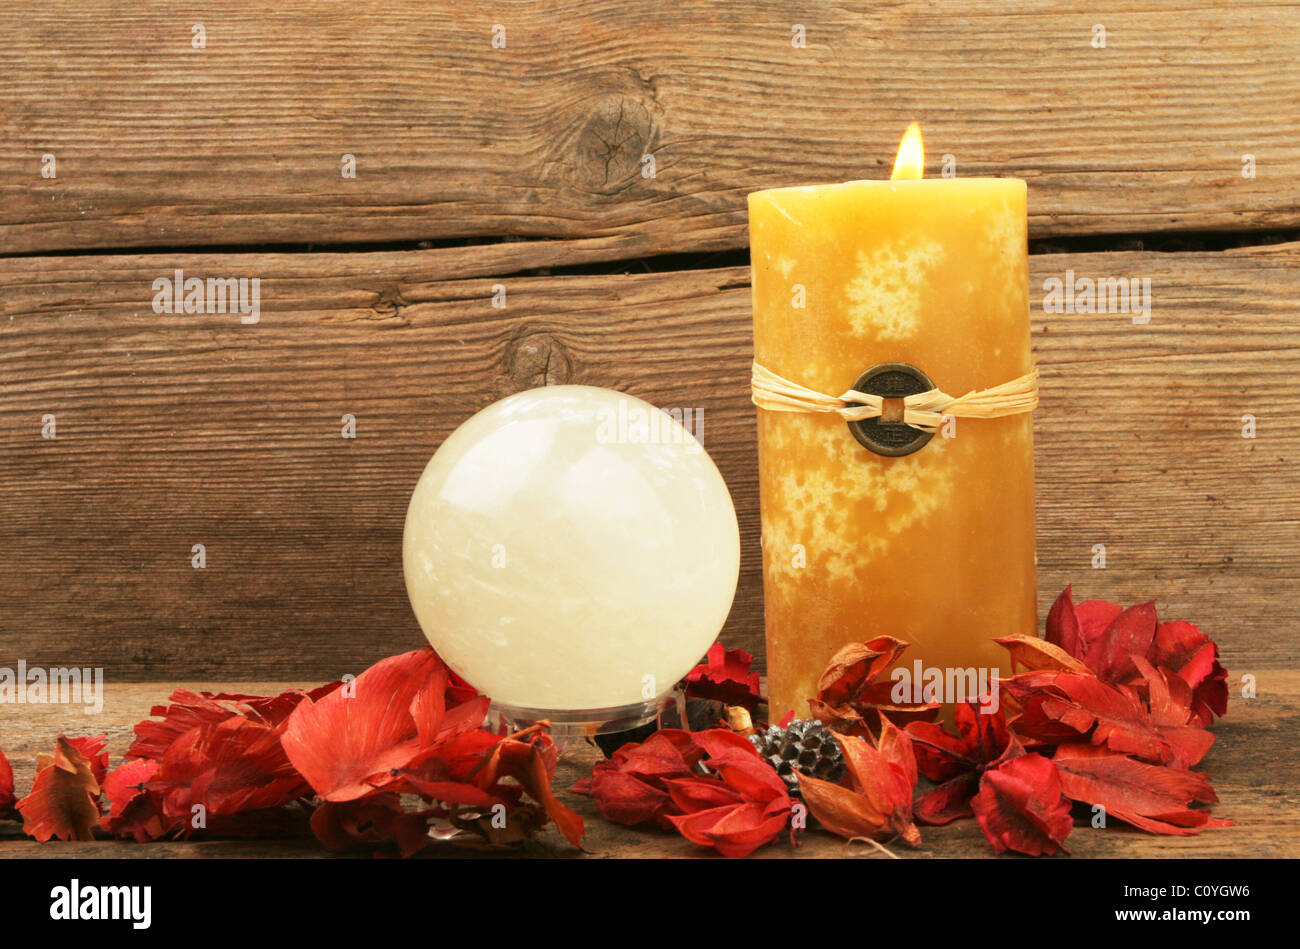 Burning feng shui candle, dried flowers and a crystal ball Stock Photo